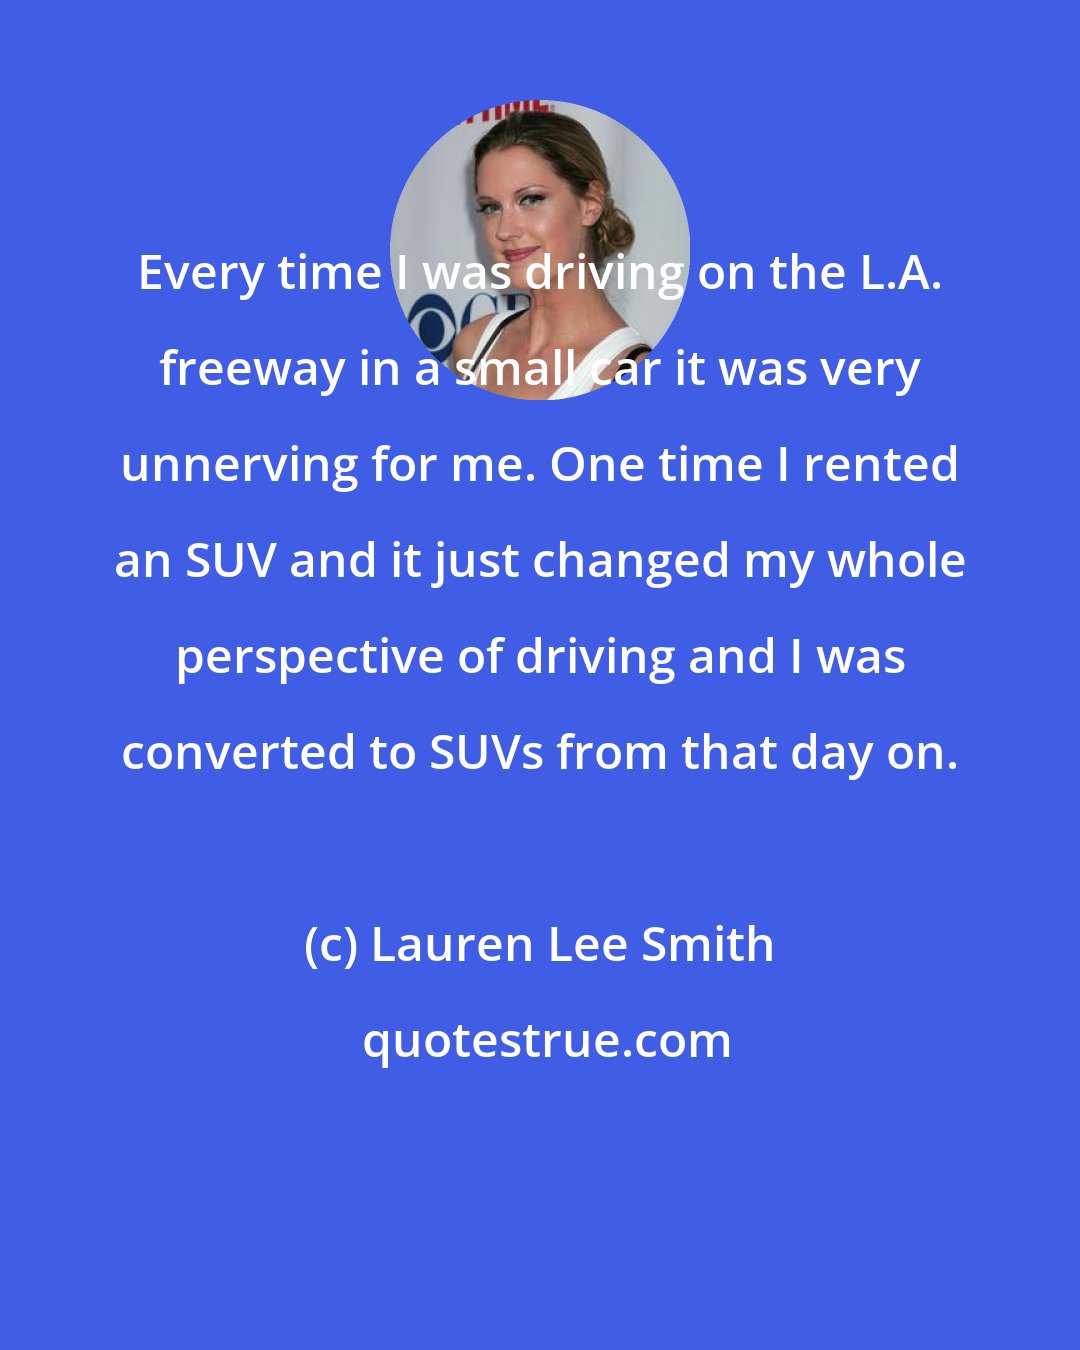 Lauren Lee Smith: Every time I was driving on the L.A. freeway in a small car it was very unnerving for me. One time I rented an SUV and it just changed my whole perspective of driving and I was converted to SUVs from that day on.